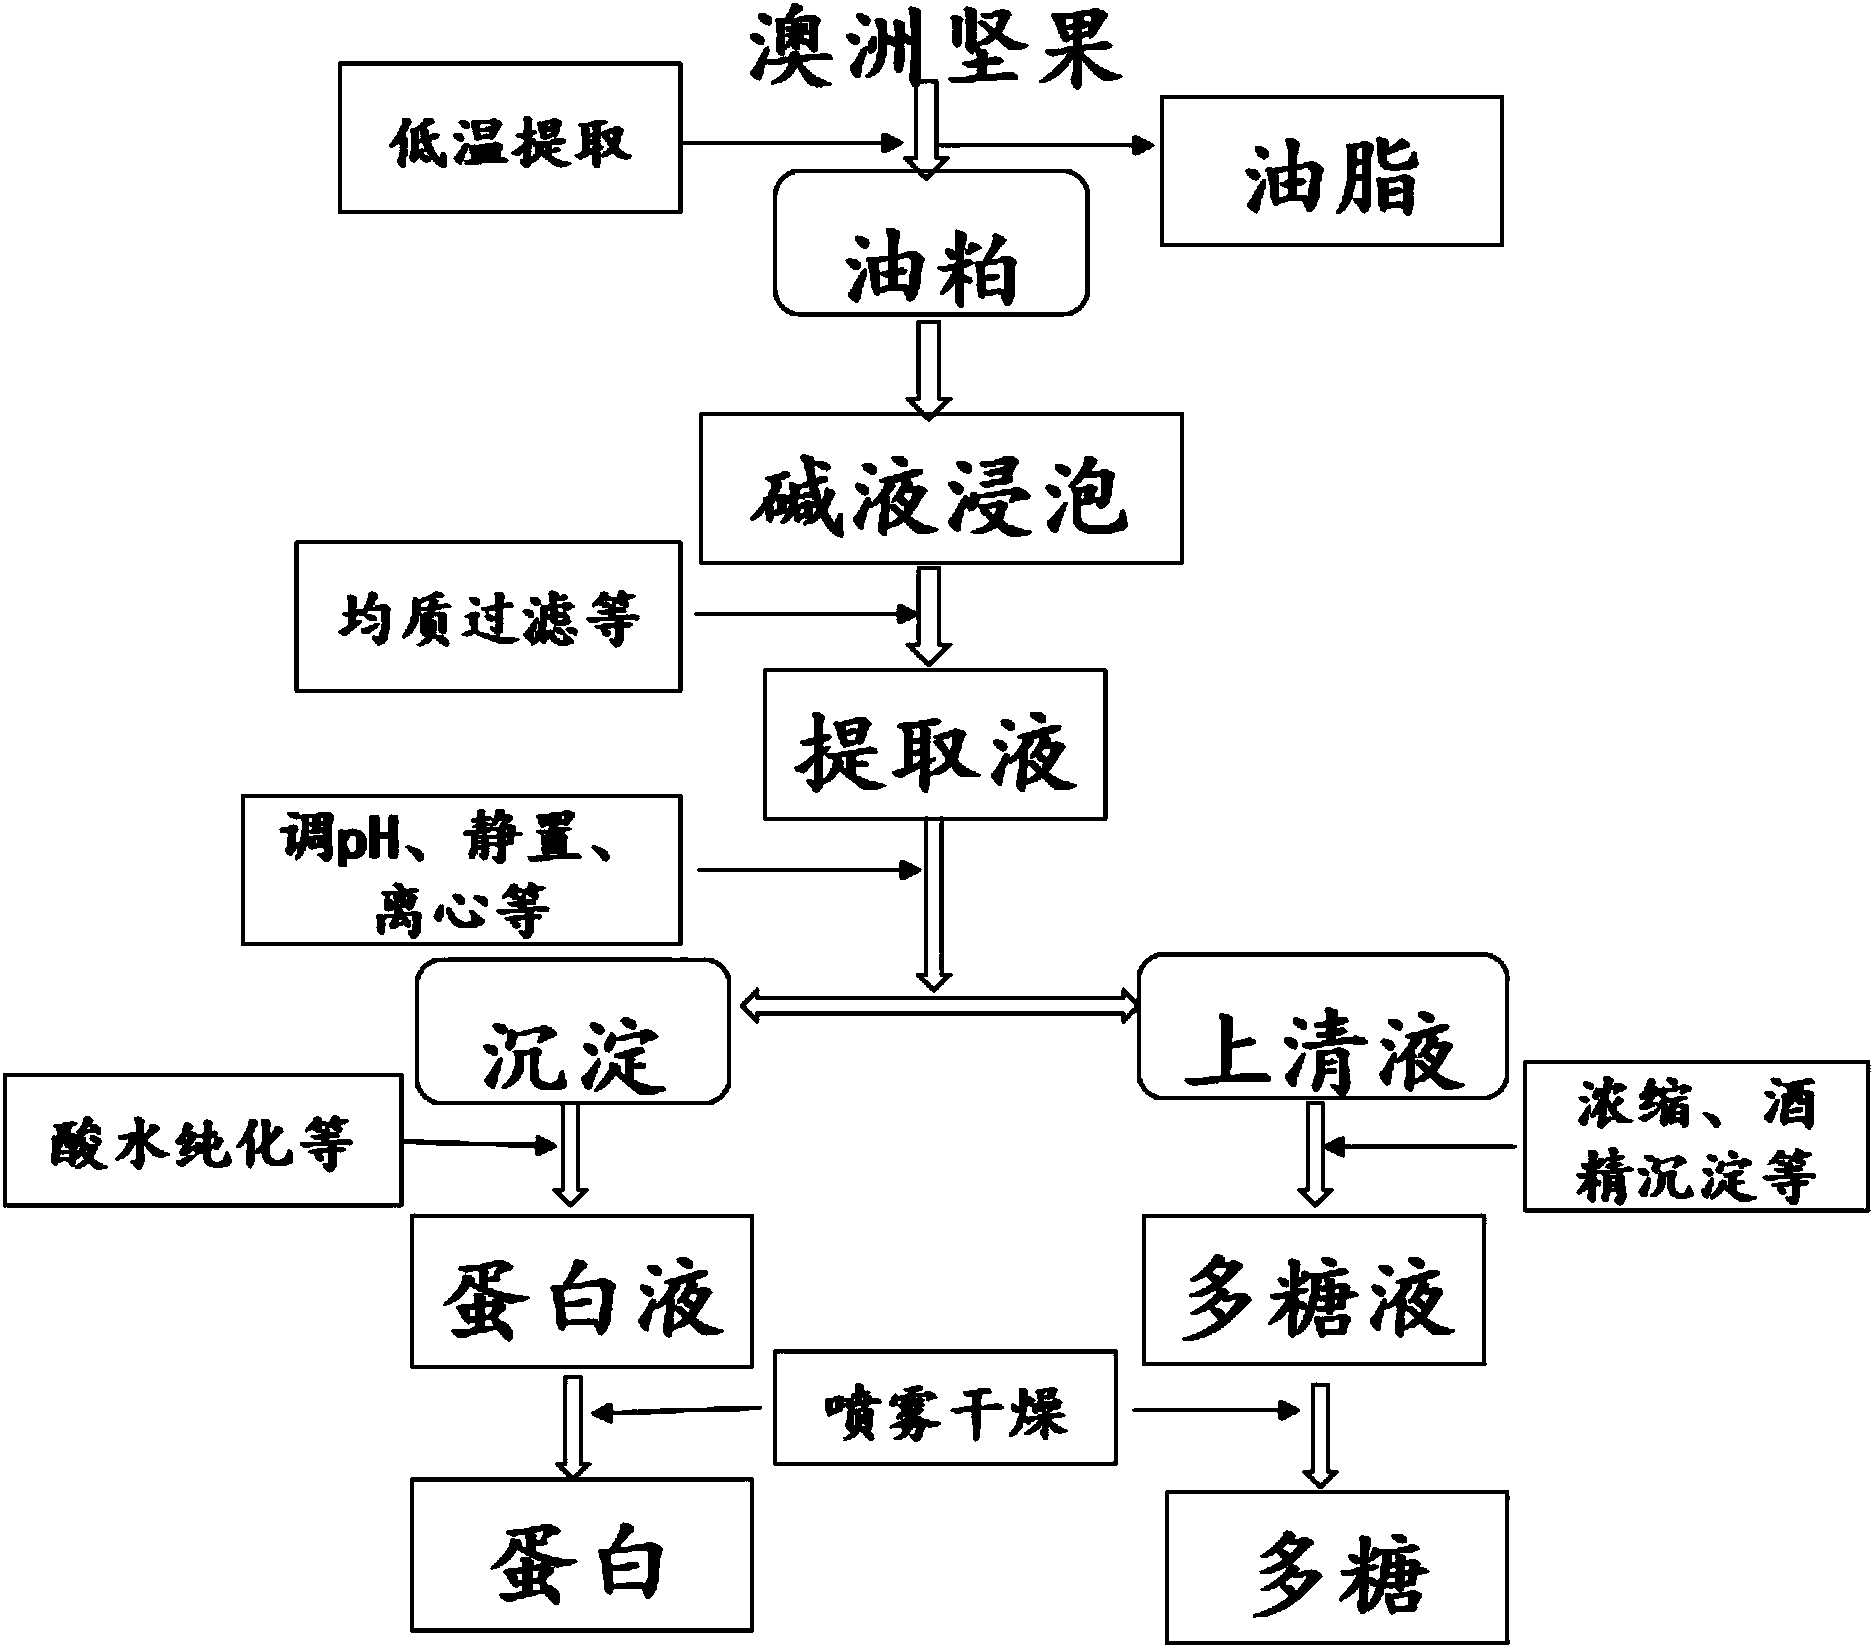 Separation method for coproducing macadimia nut polysaccharide and albumen